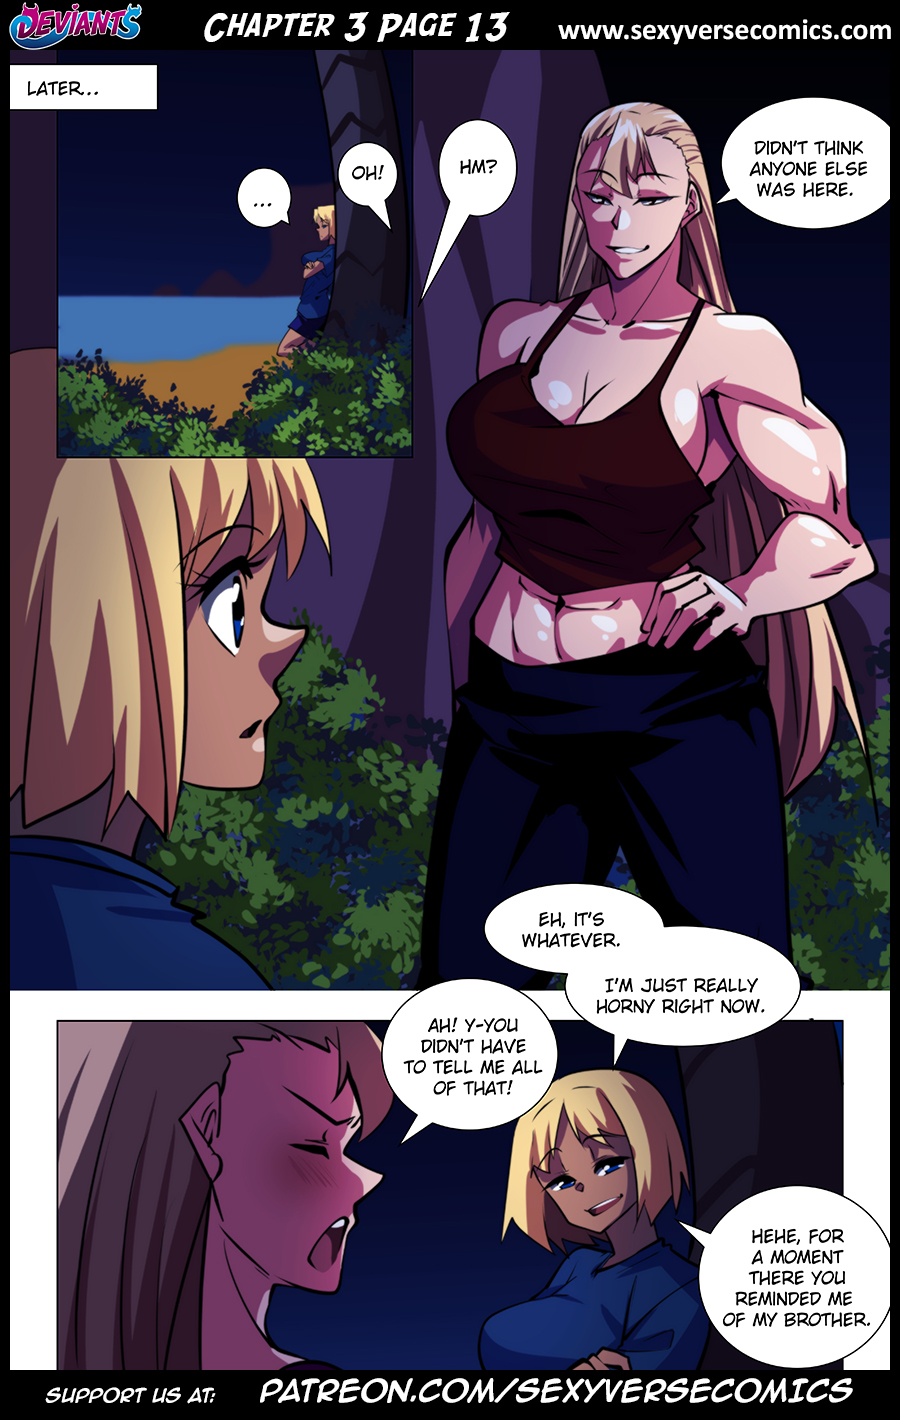 Deviants Chapter 3 Page 13